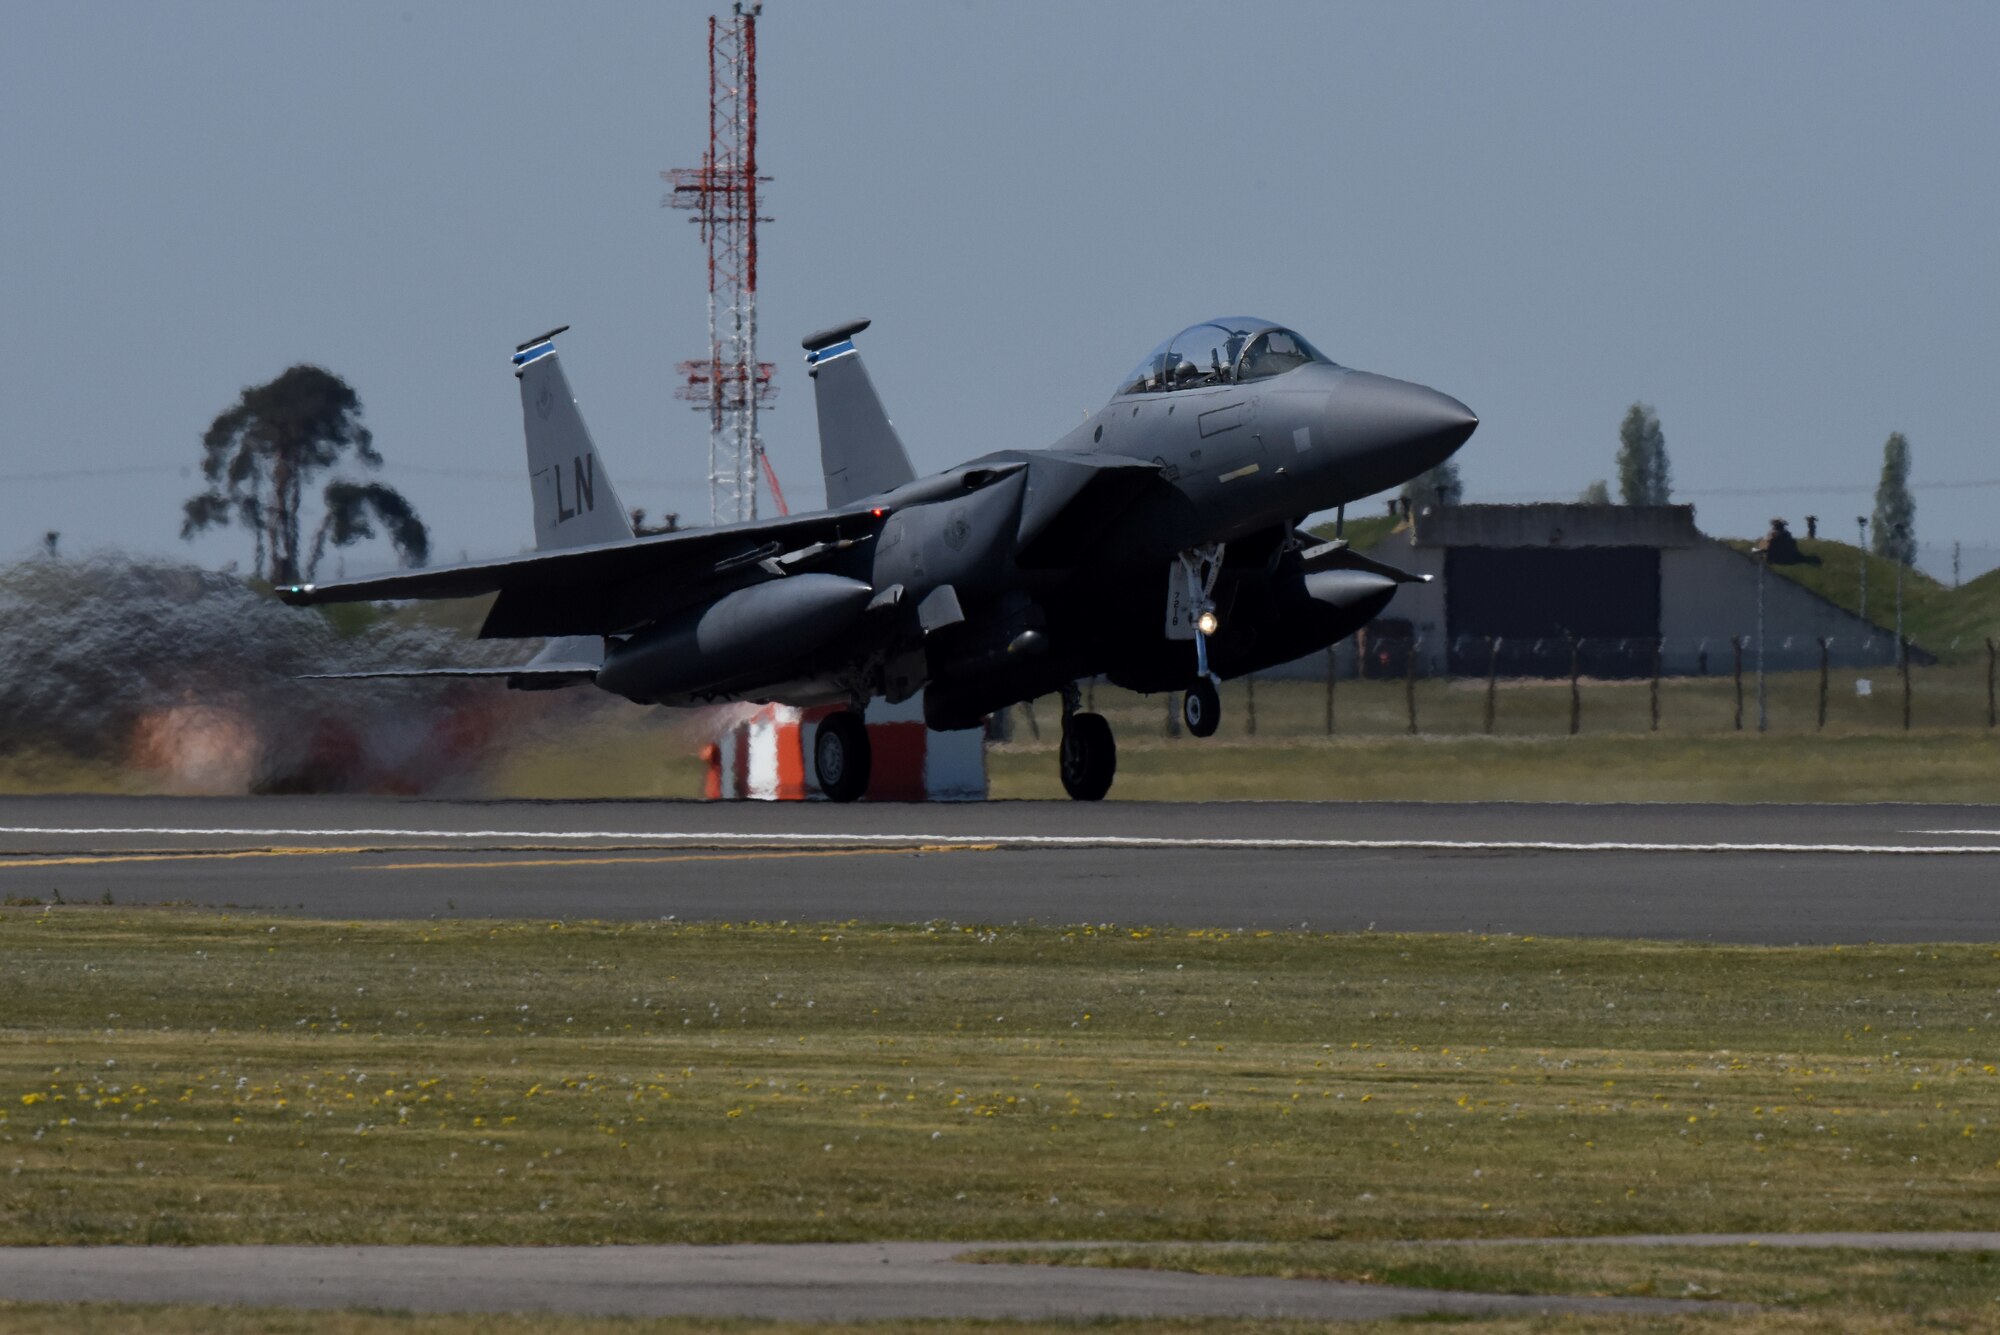 An F-15E Strike Eagle assigned to the 492nd Fighter Squadron takes off at Royal Air Force Lakenheath, England, April 21, 2020. An array of avionics and electronics systems gives the F-15E the capability to fight at low altitude, day or night and in all weather. (U.S. Air Force photo by Airman 1st Class Rhonda Smith)